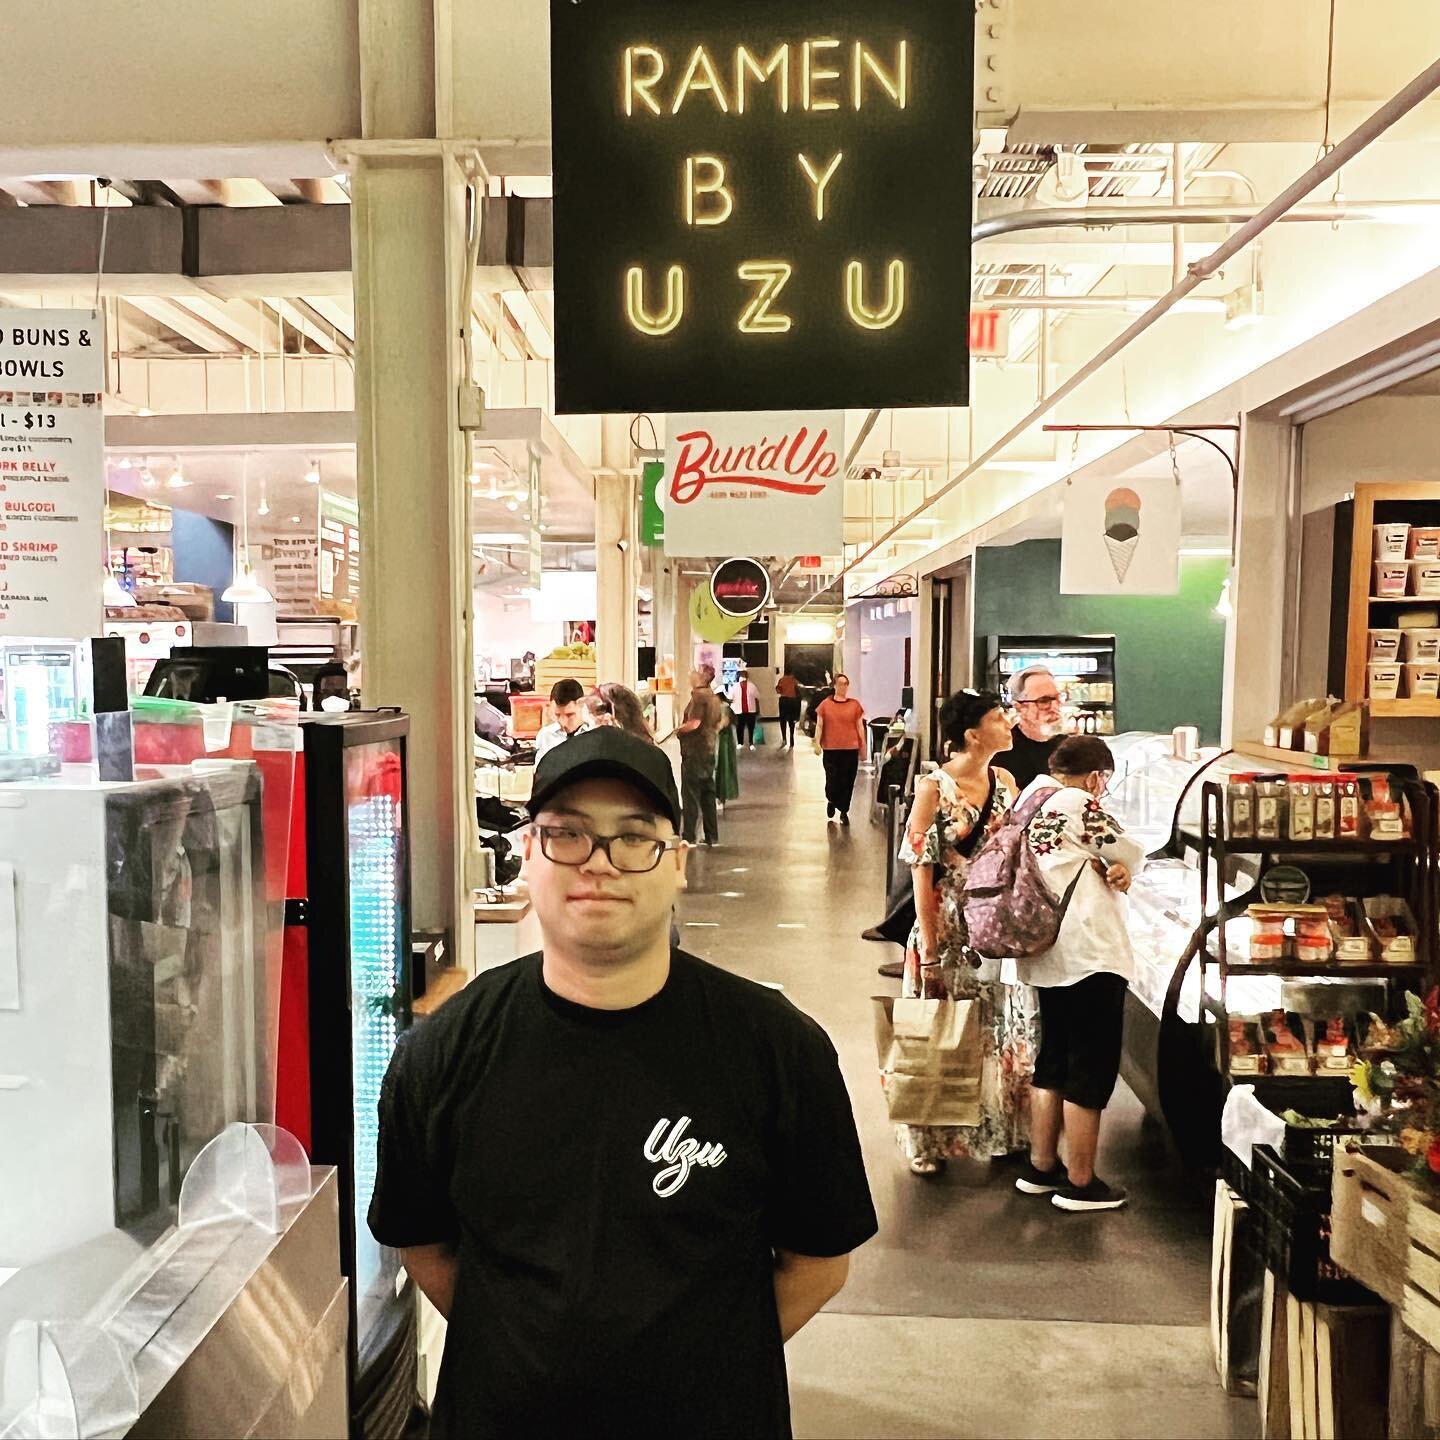 This is Victor, the newest member of Team UZU. Victor is very detail oriented and puts his 100% to his ramen. His favorite bowl is shoyu ramen.
Come see him and say hi today! We open every day 🍜